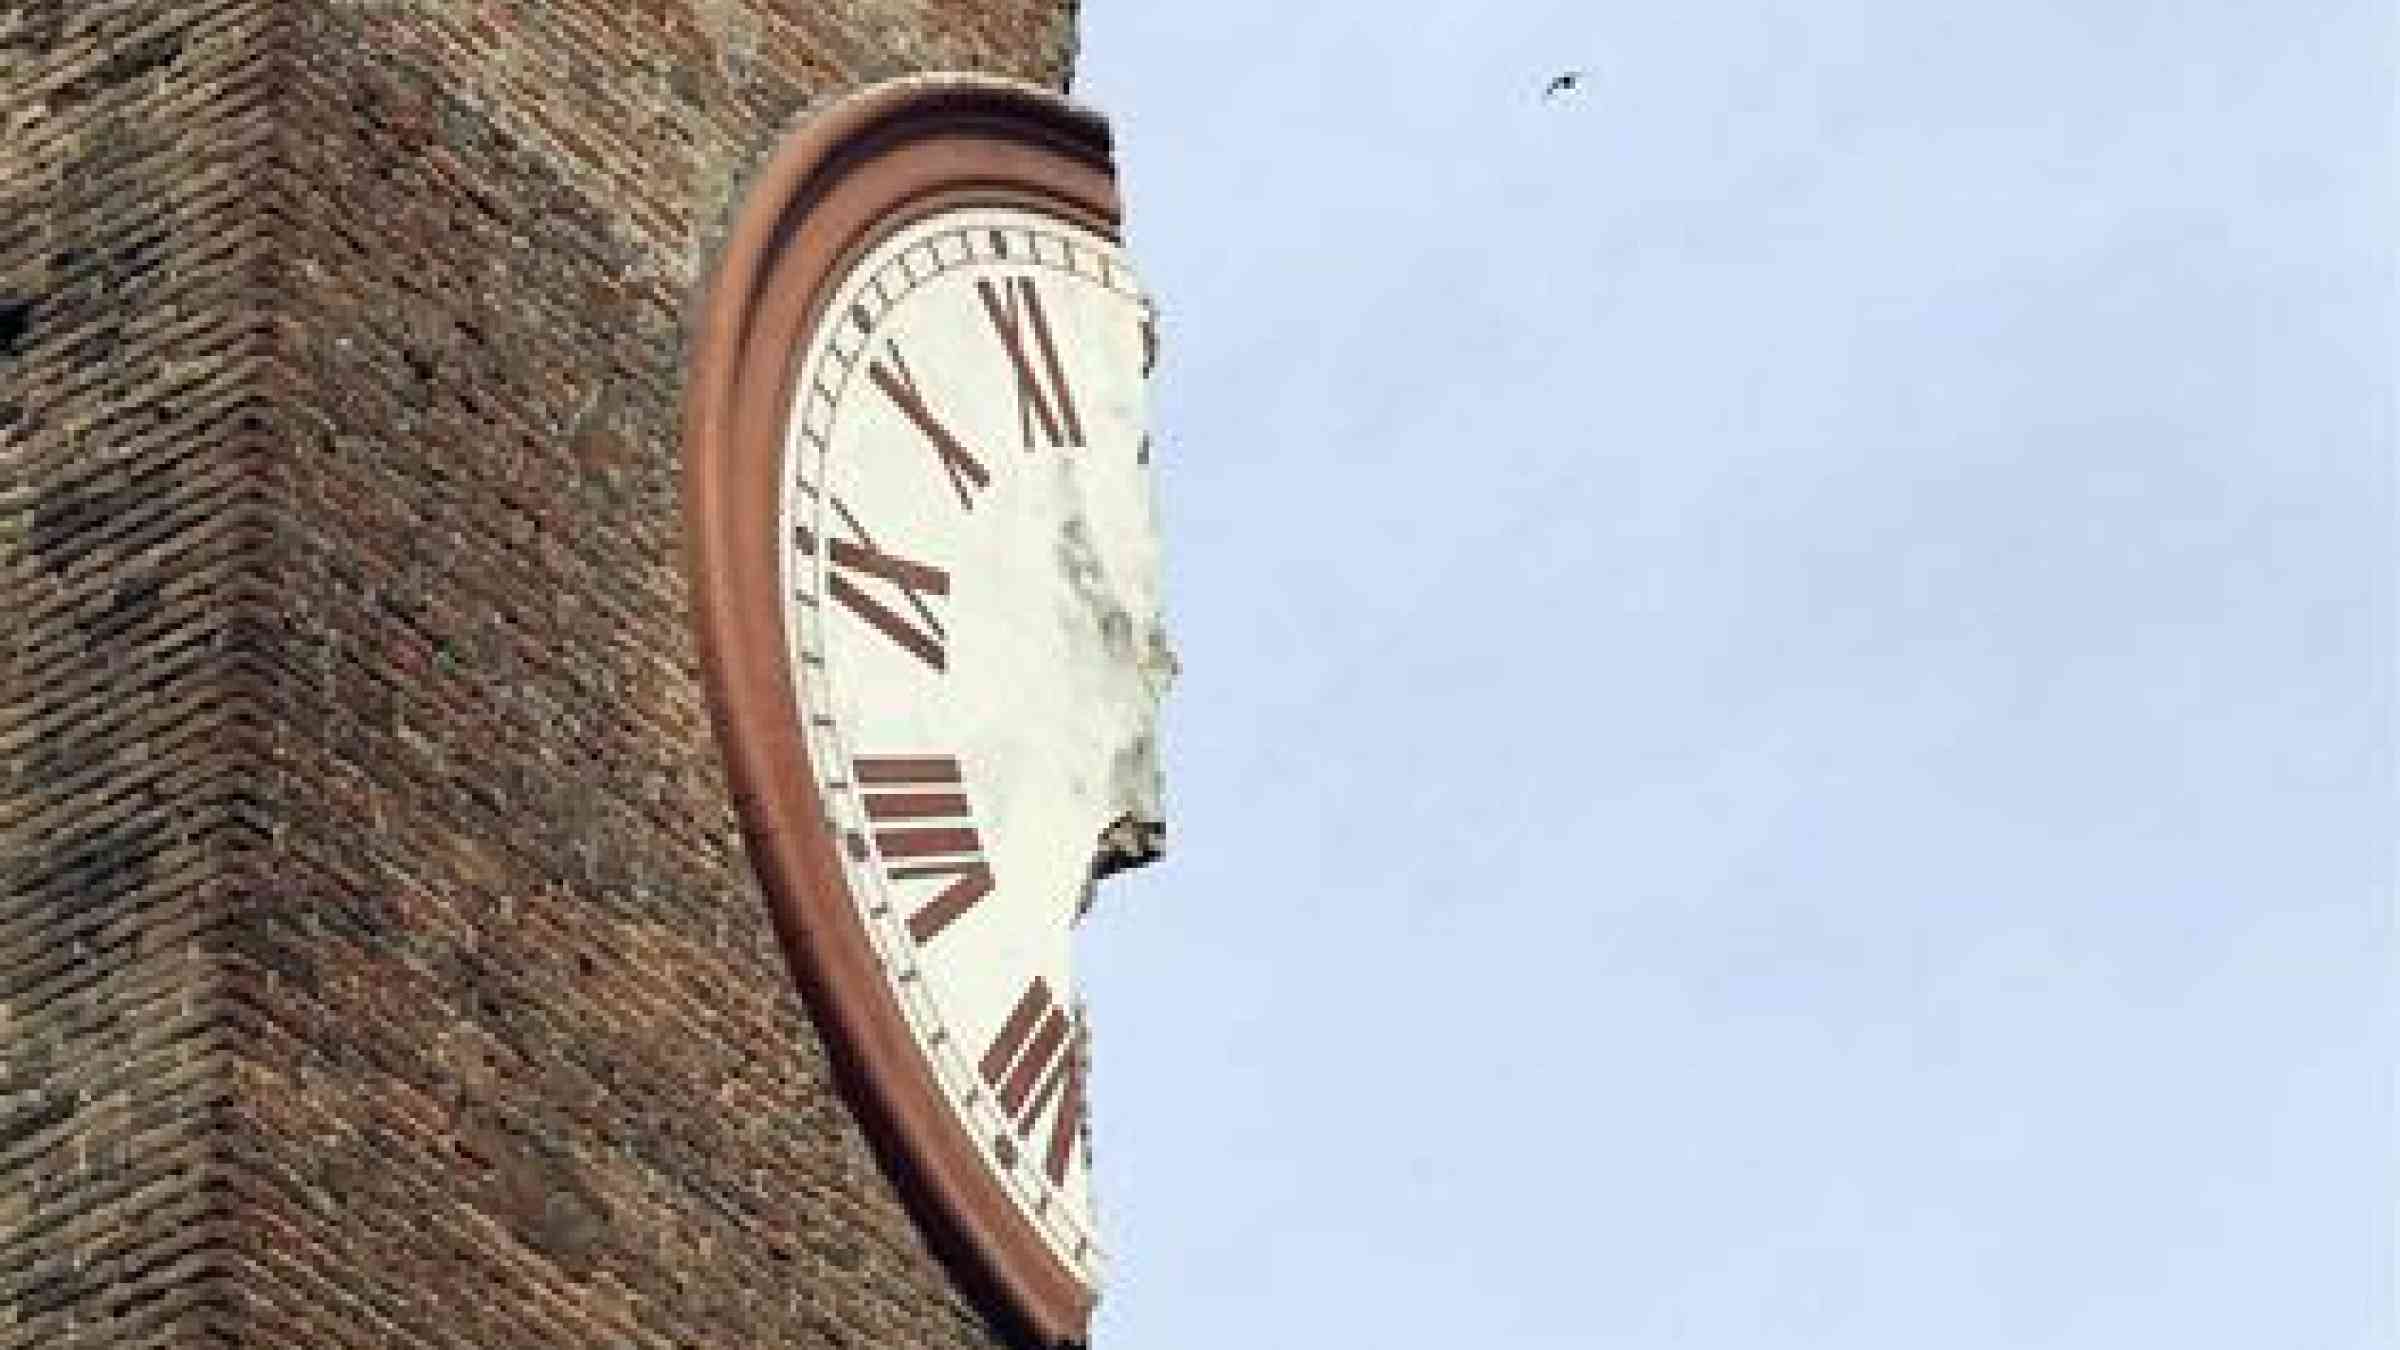 Half of a clock tower in Finale Emilia dating from the 13th century (known as the torre dei modenesi) collapsed following the 2012 earthquake that struck the Emilia-Romagna region. The remaining half fell following an aftershock.